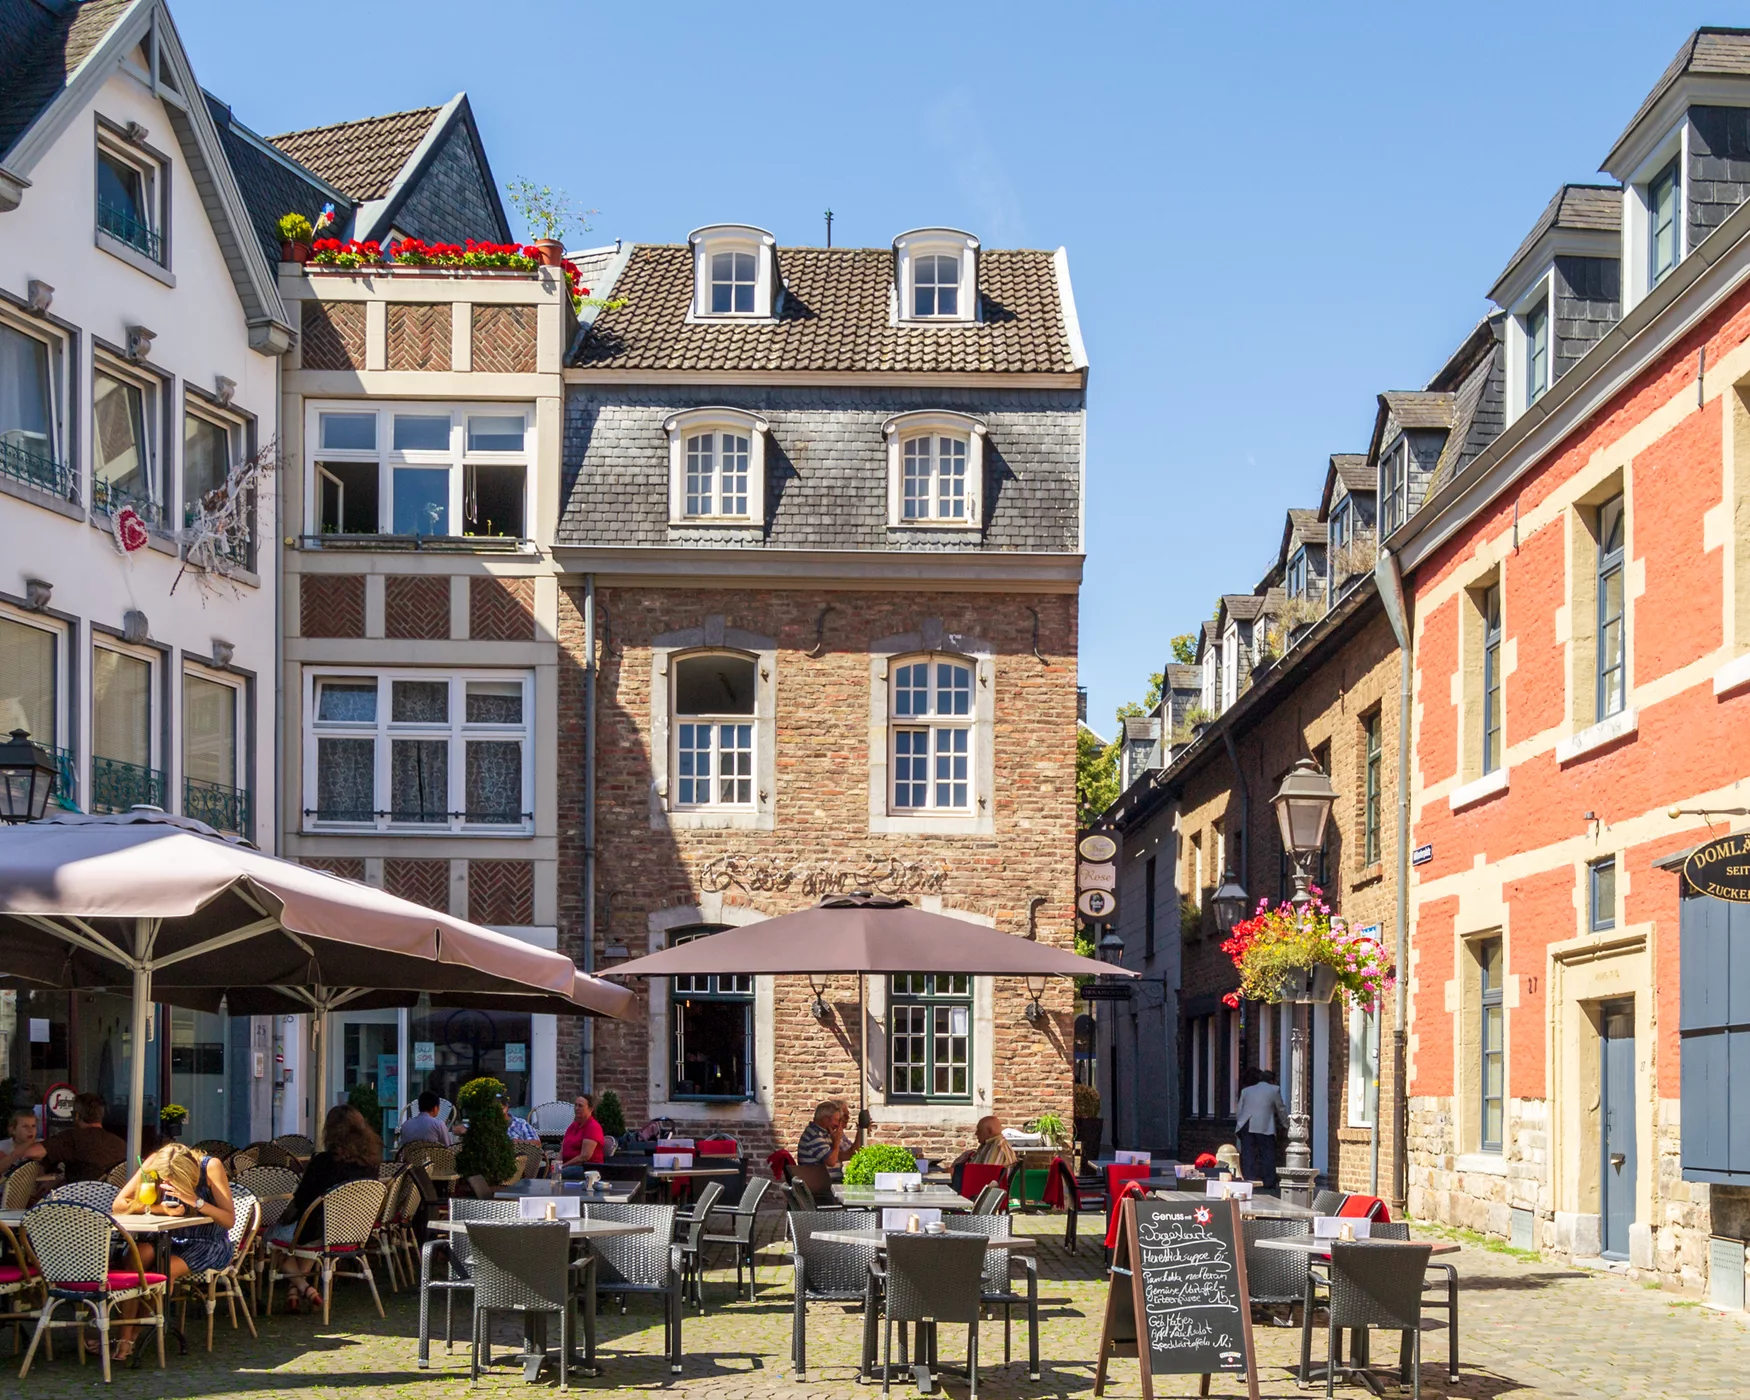 Coffee shops by the Aachen Dom, Germany